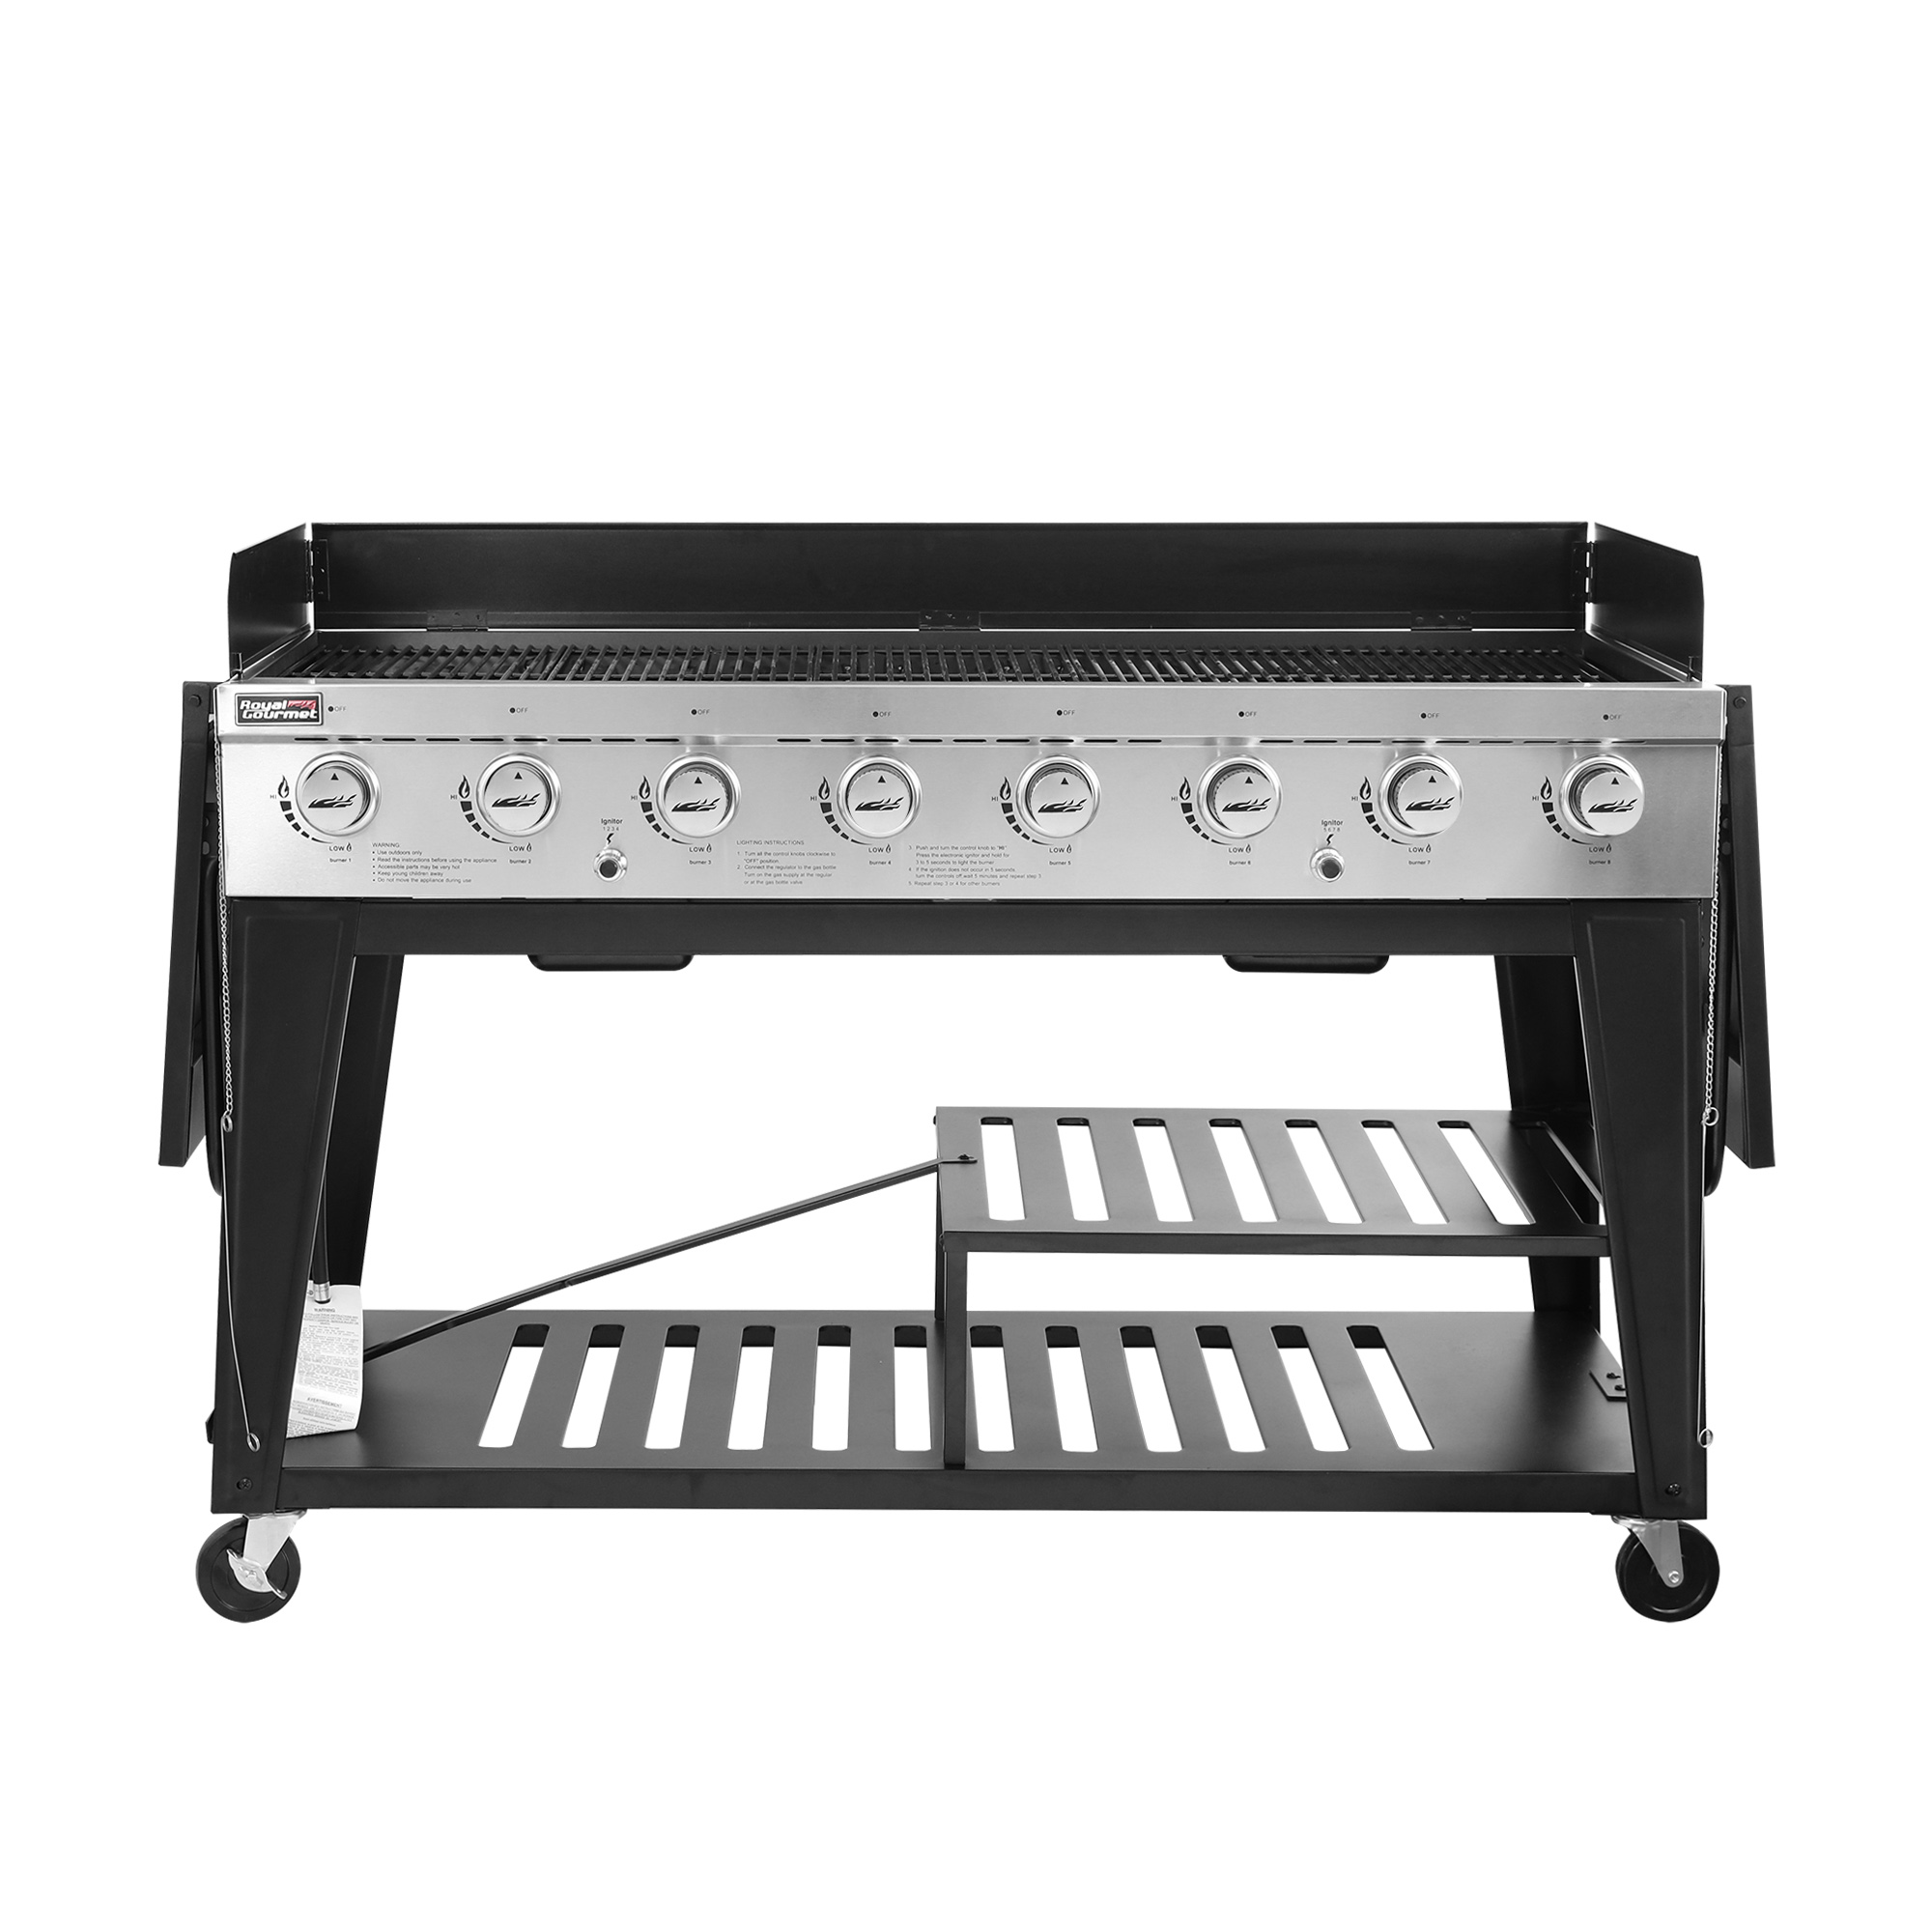 Royal Gourmet GB8001 8-Burner BBQ Gas Propane Grill Outdoor Large Party - image 3 of 12